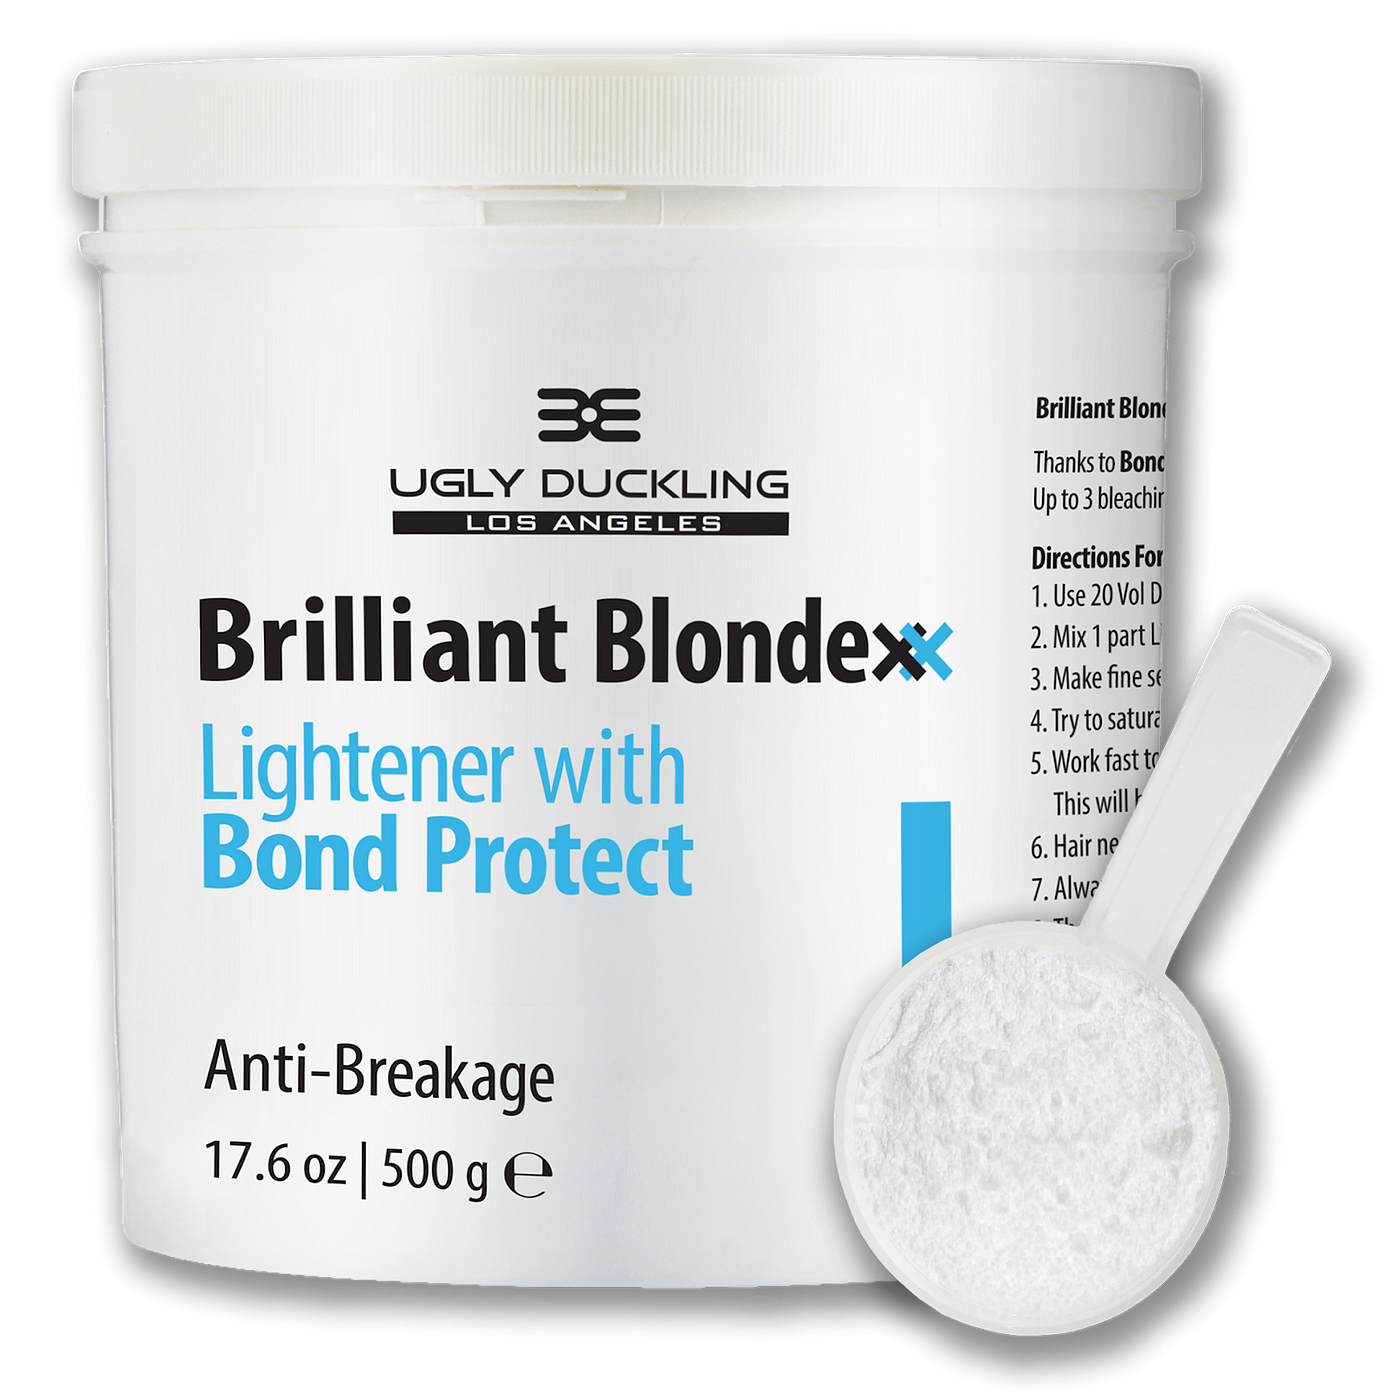 Ugly Duckling Hair Color Announces A Revolutionary Lightener with Bond  Protect, by Jennifer Woods - Twitter @WriterJennWoods